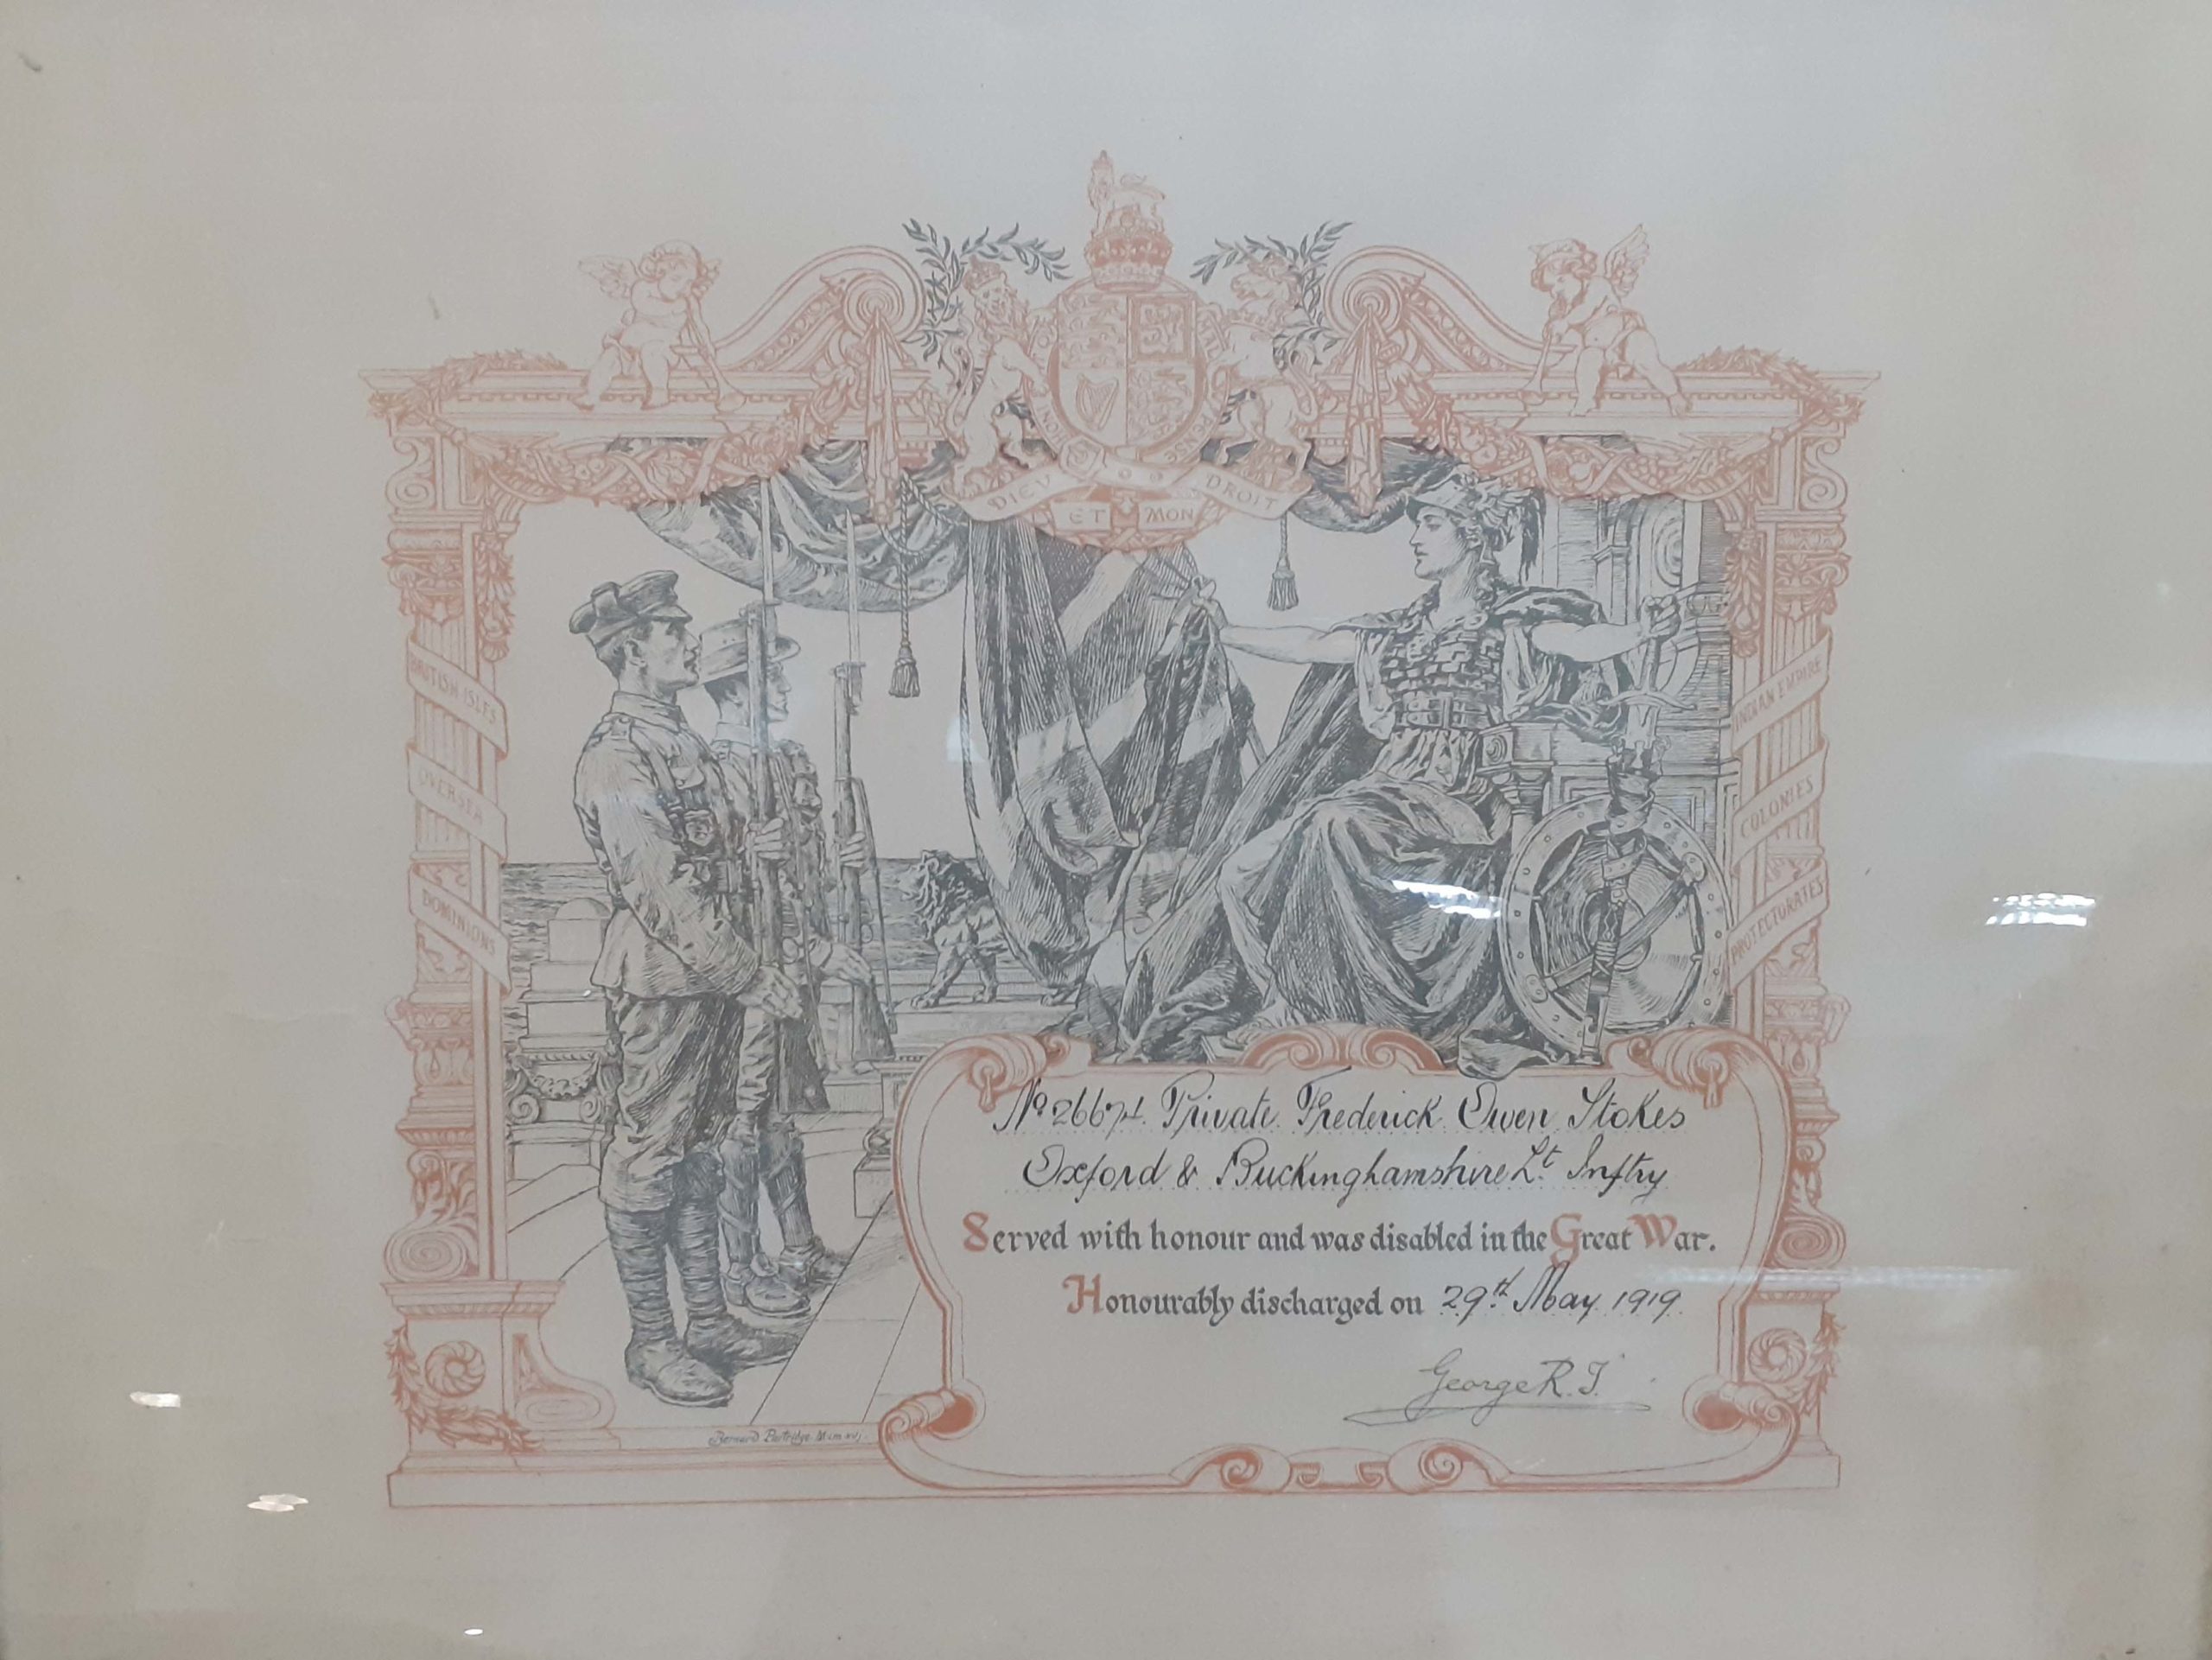 A Great War Honourable Discharge Scroll to Private Frederick Owen Stokes